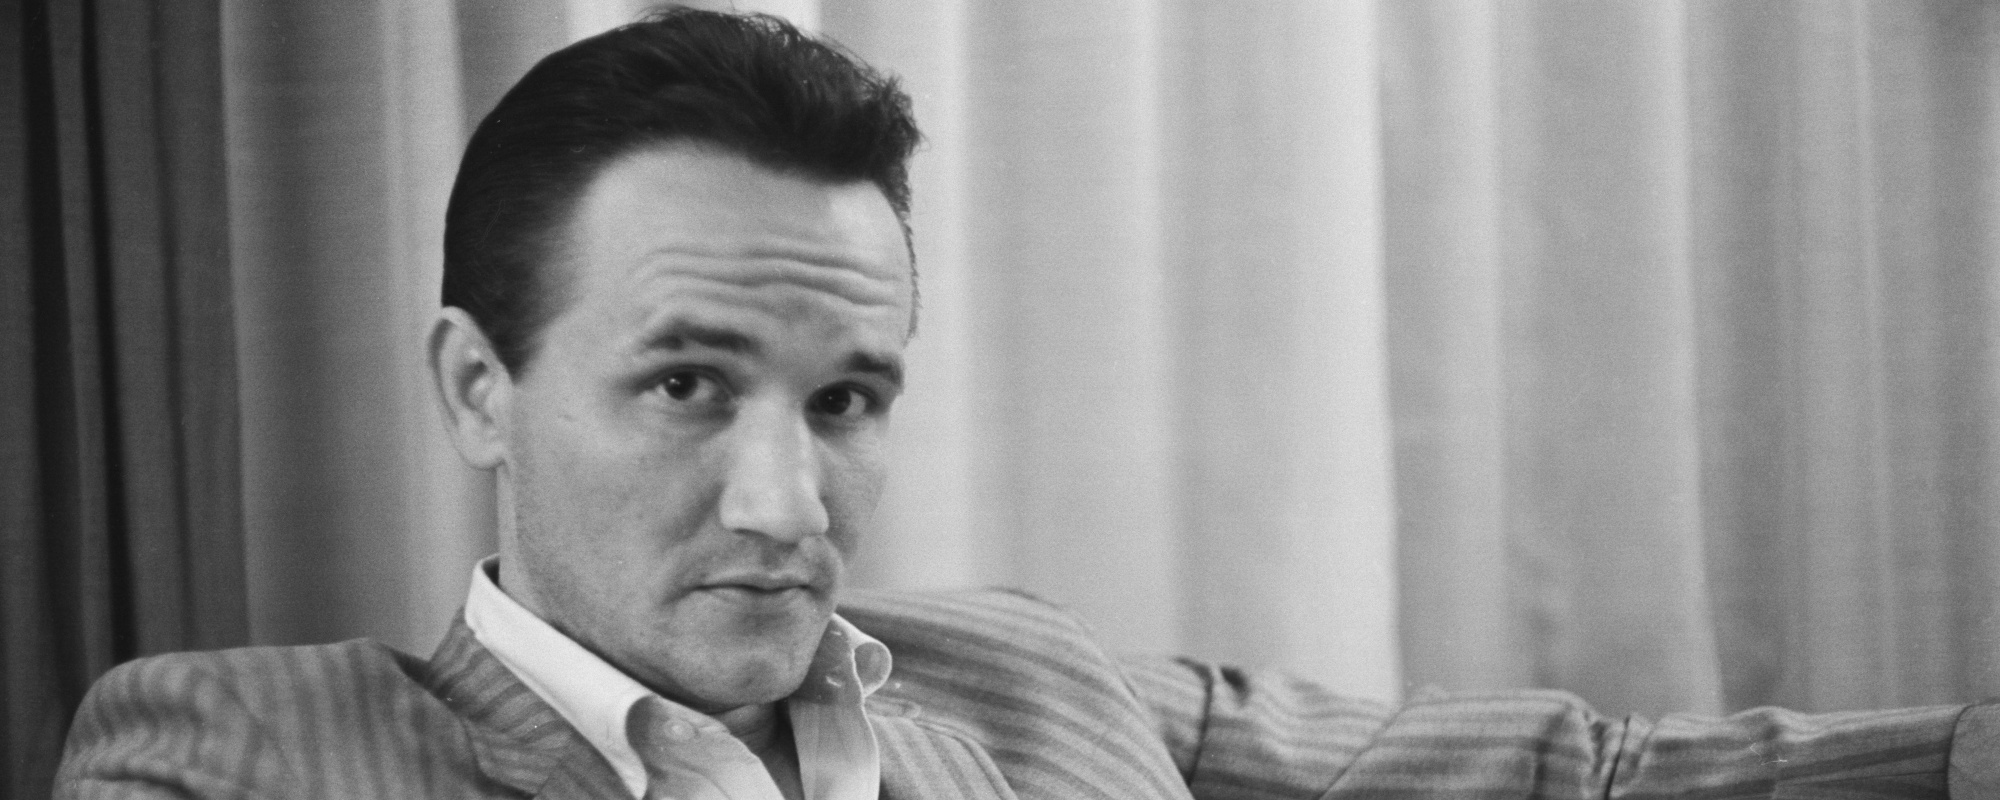 More Than “King of the Road” and “Dang Me”: 5 Fascinating Facts About Roger Miller